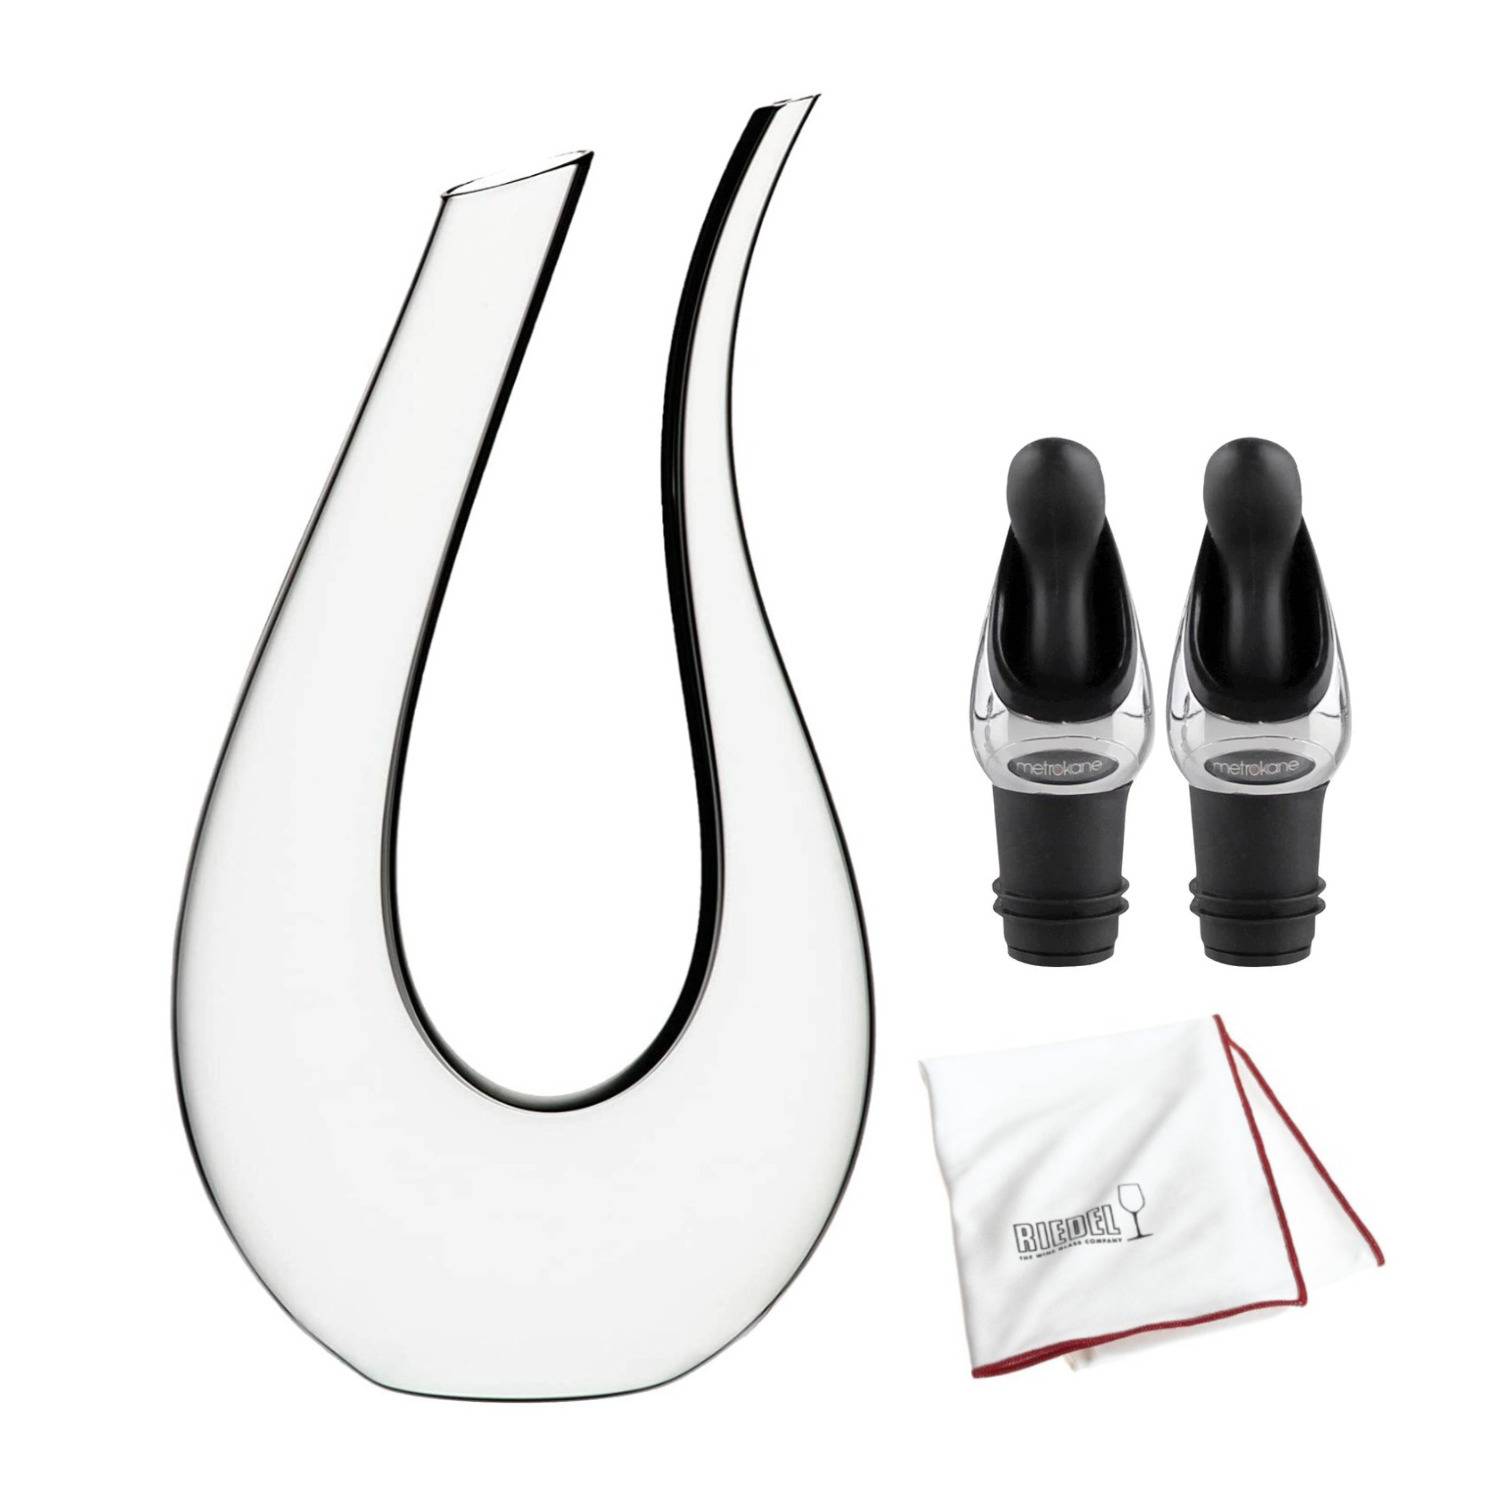 Riedel Black Tie Amadeo Decanter Bundle with 2 Wine Pourers and Large Microfiber Polishing Cloth